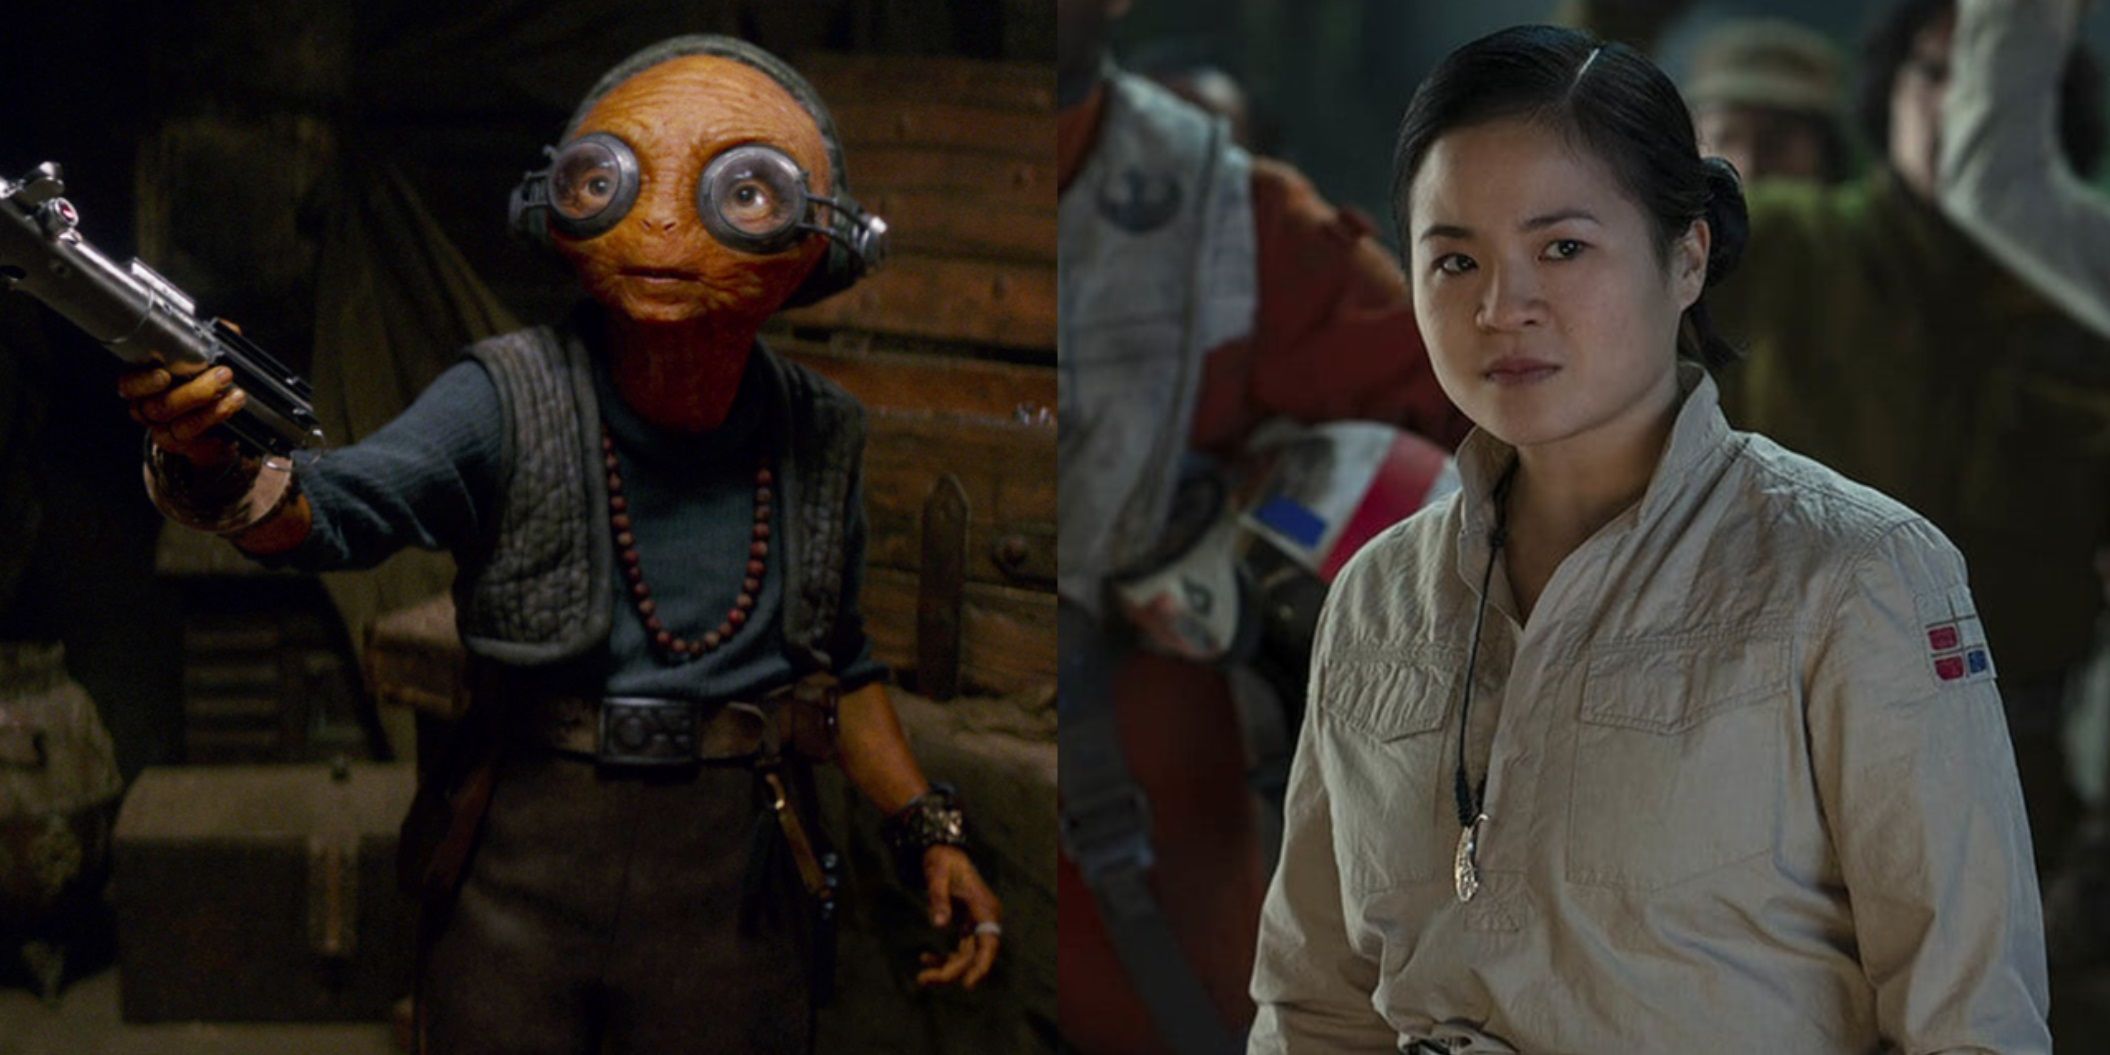 Split image of Maz Kanata in The Force Awakens and Rose Tico in The Rise of Skywalker